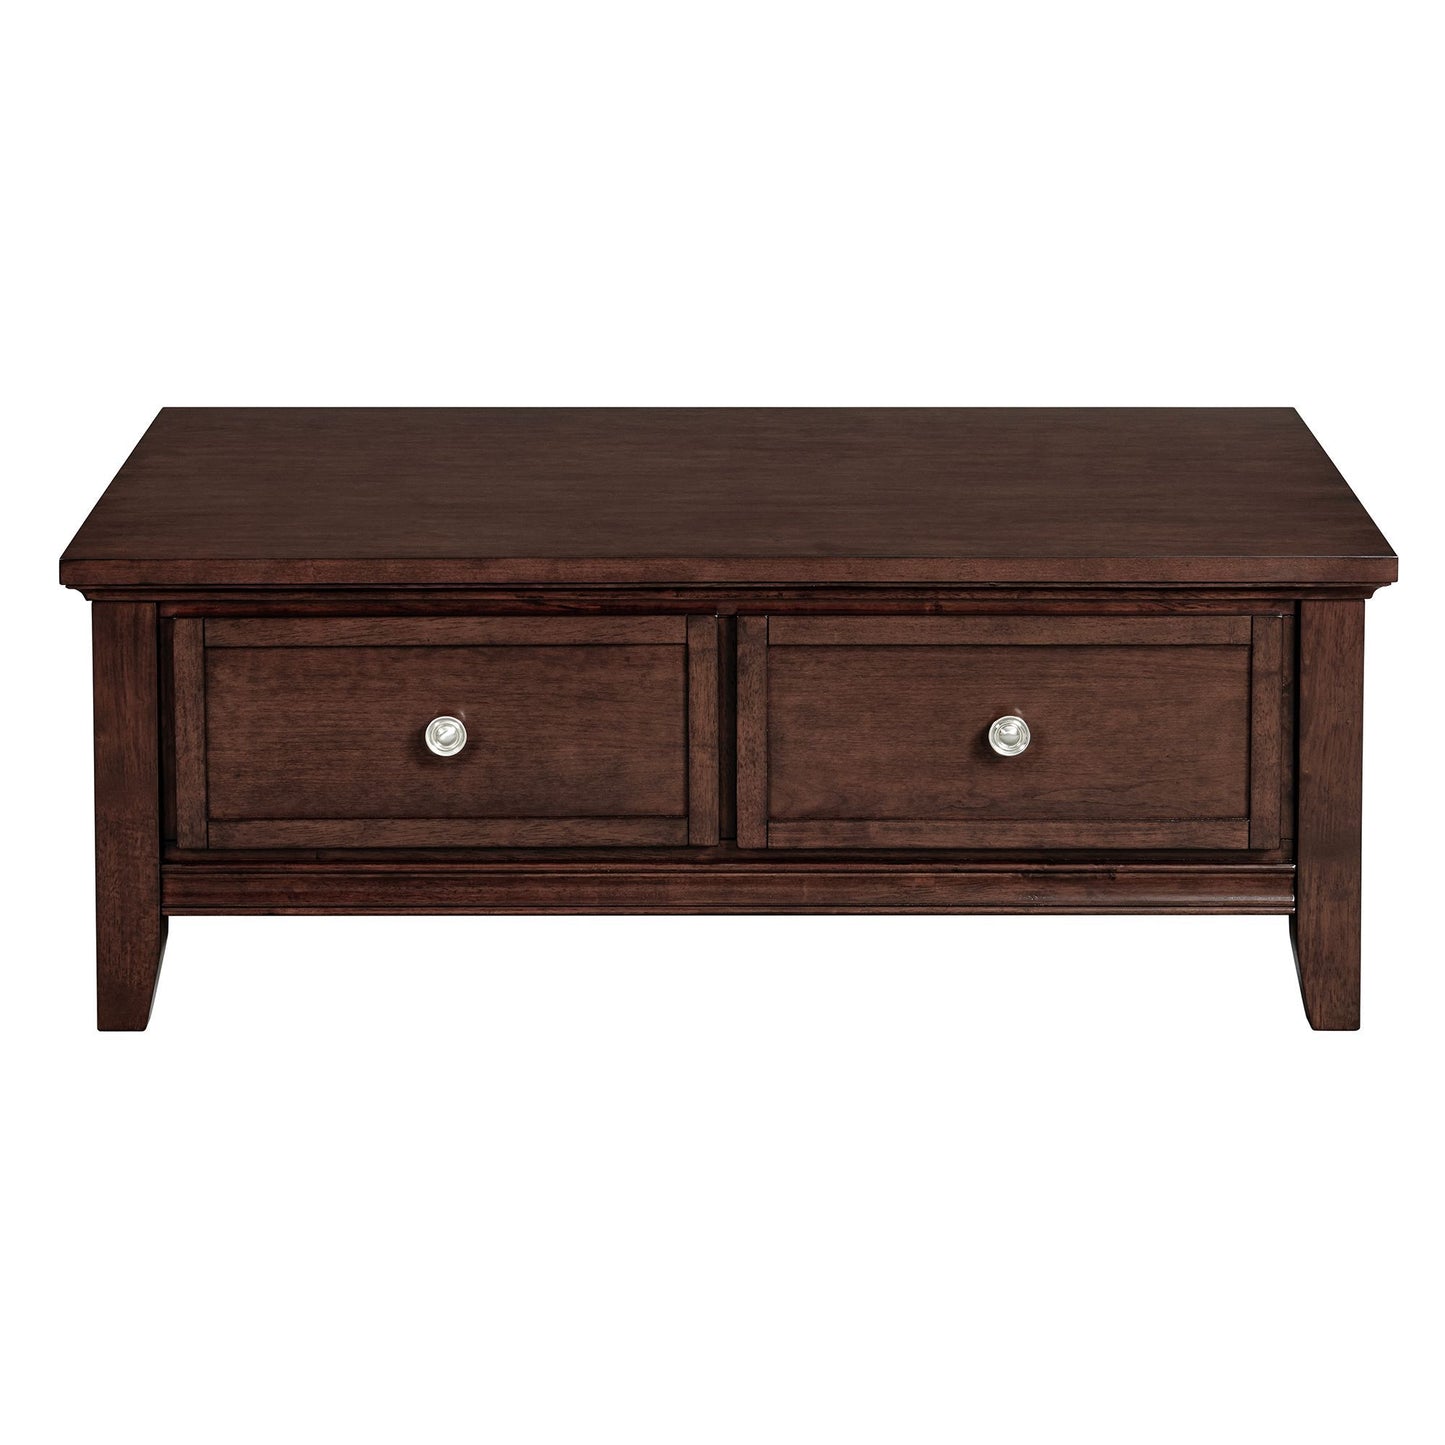 Chatham - Coffee Table - Cherry